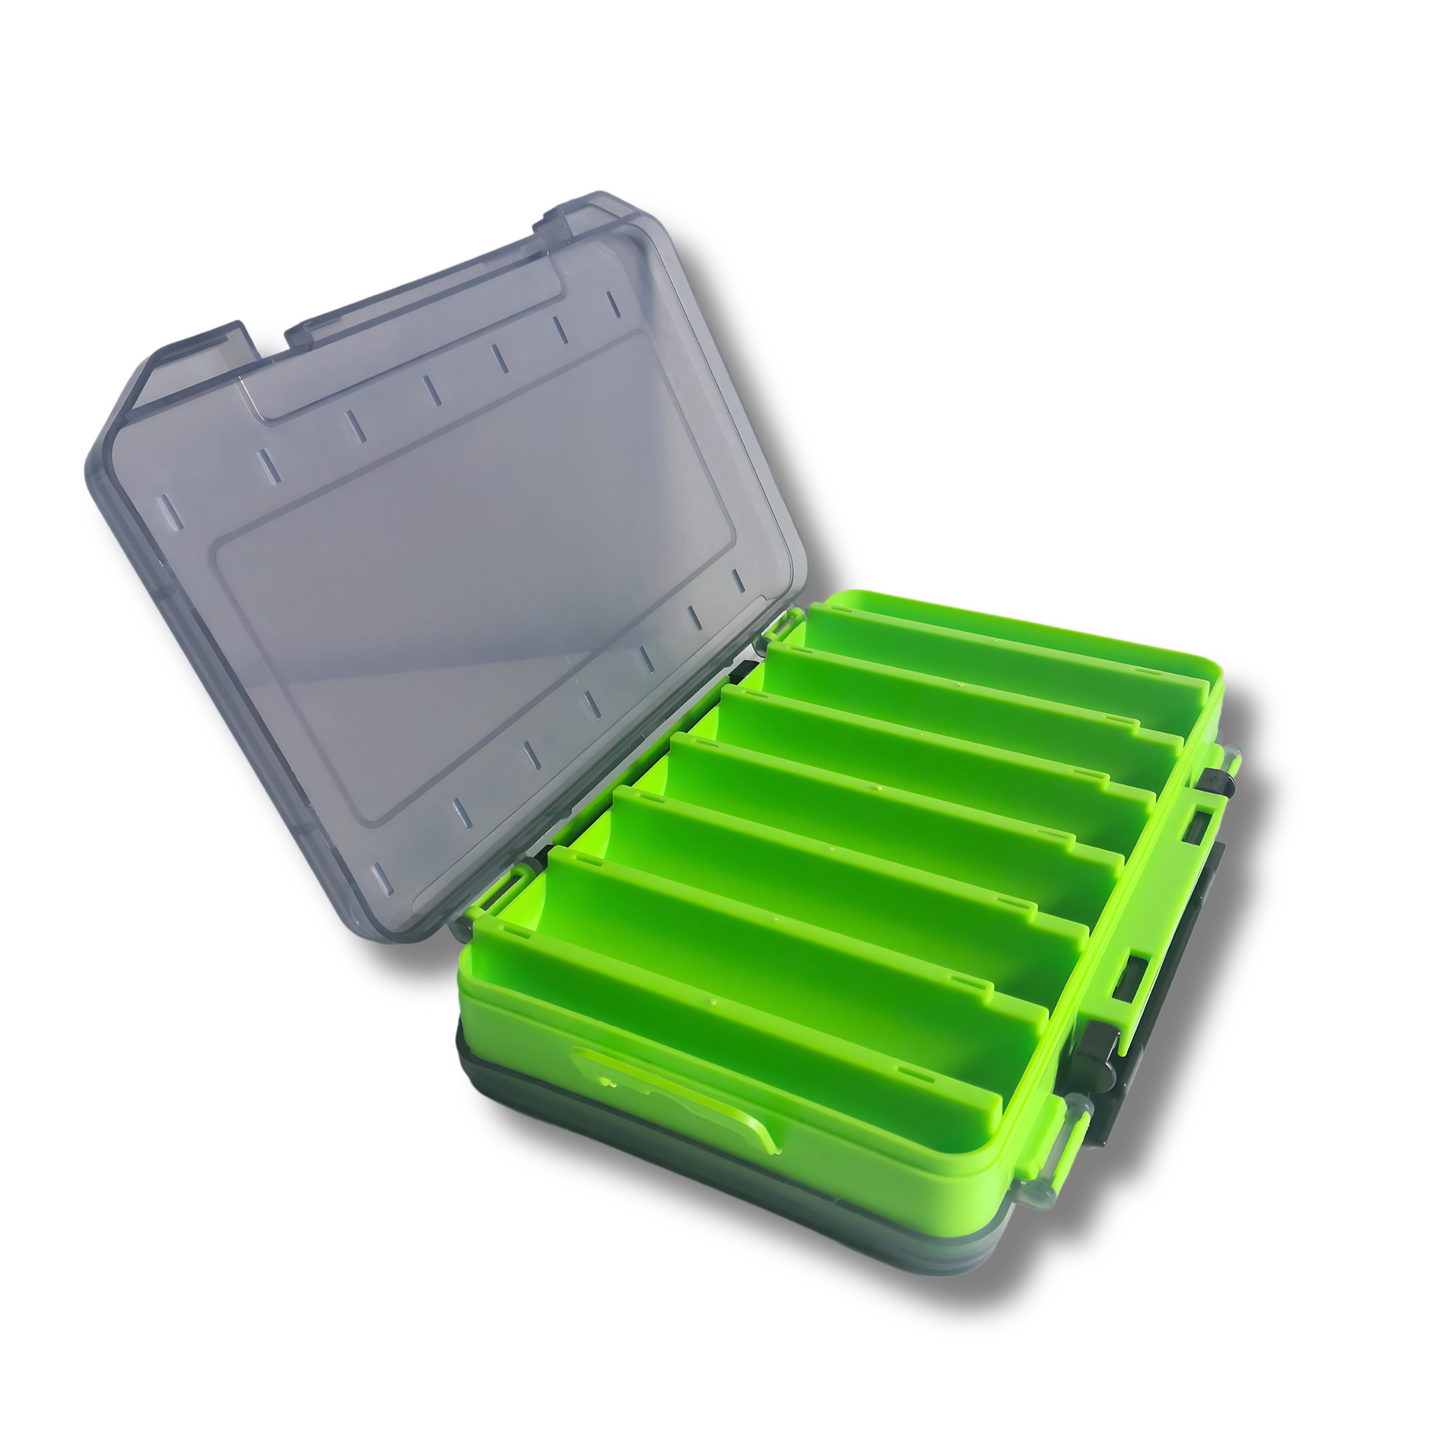 Gobait Fishing Box - 198mm x 132mm | 7.8in x 5.2in - 14 Compartments - Green